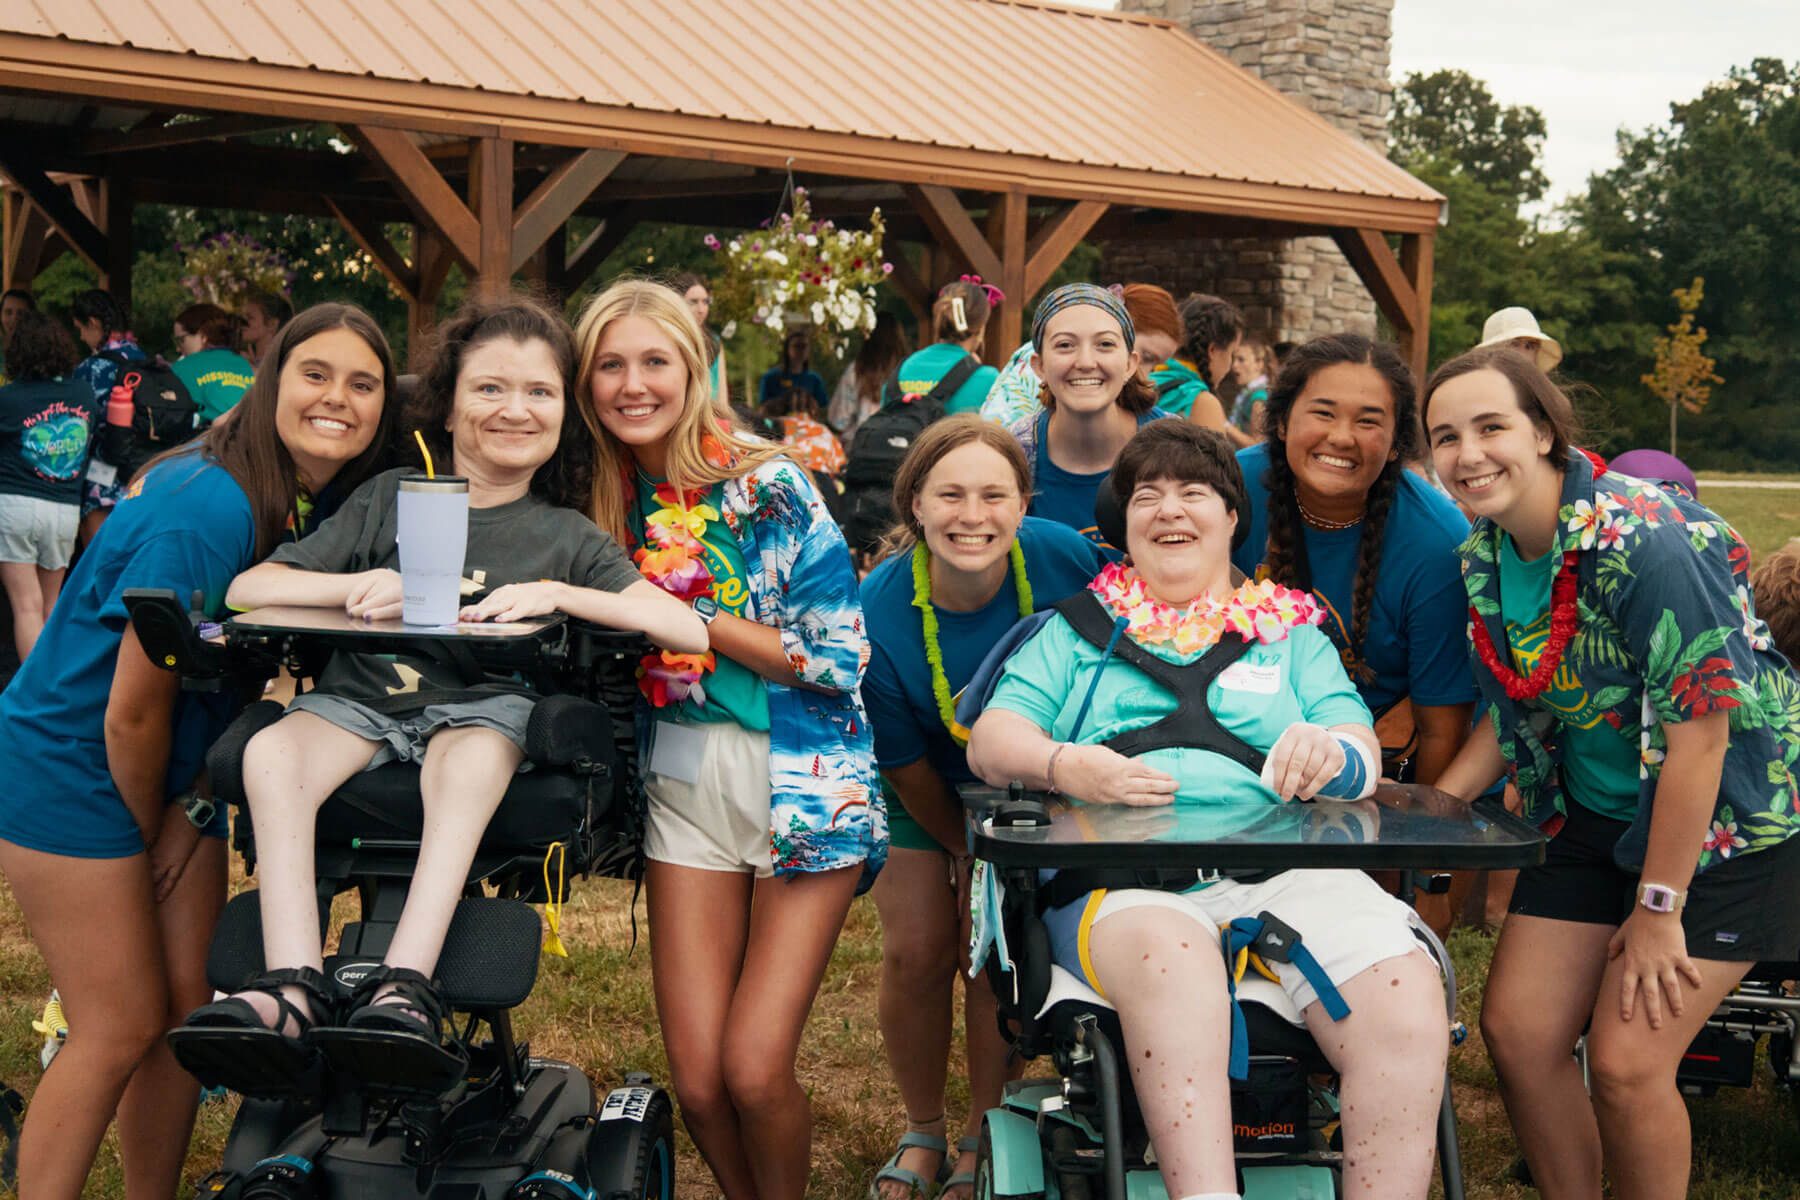 Summer camp counselors with campers in wheelchairs smiling